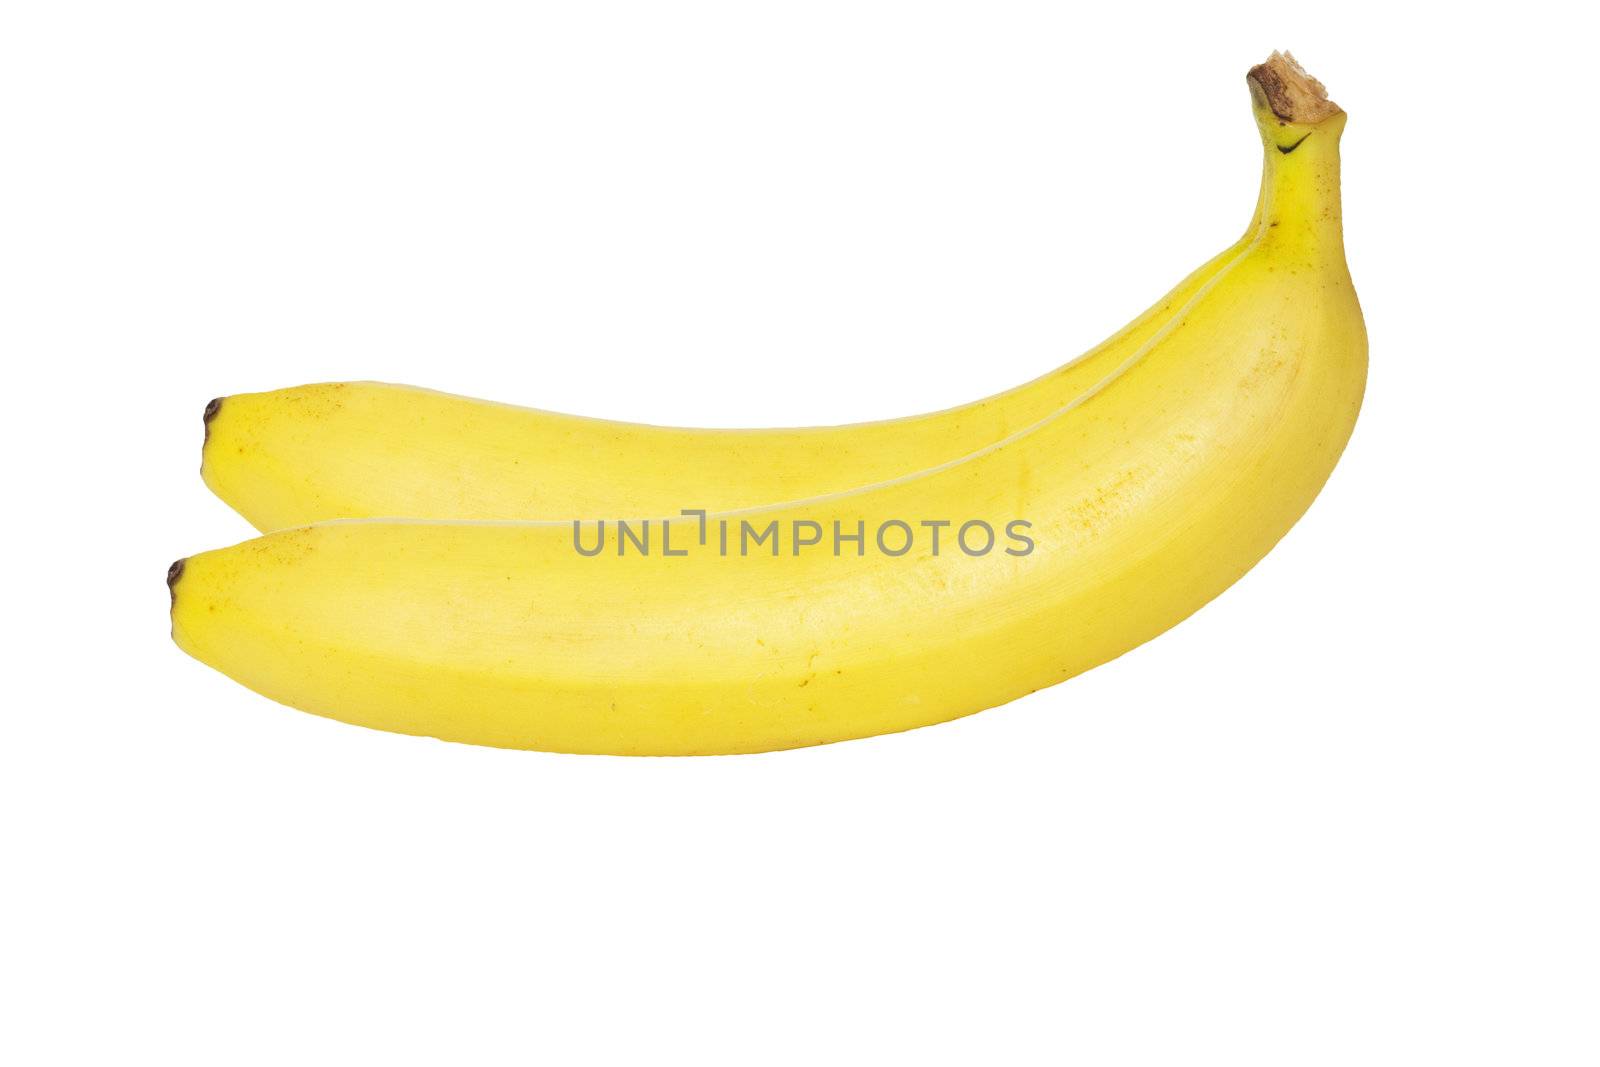 two mature bananas insulated on white background